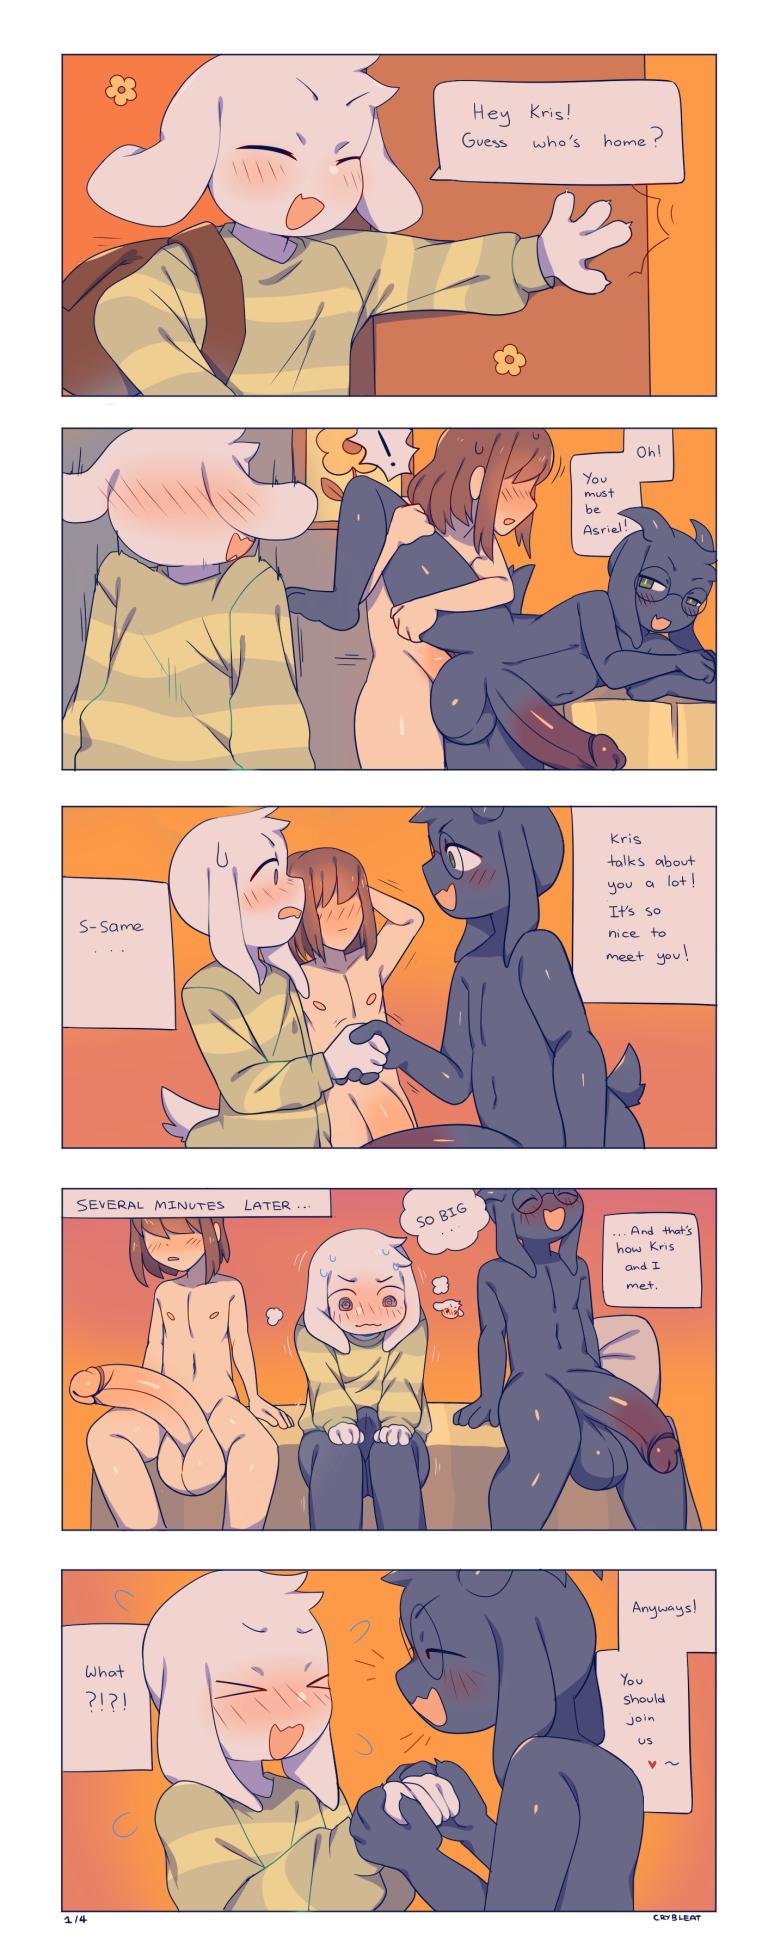 [crybleat] Asriel Gangbang (Deltarune) - Page 1